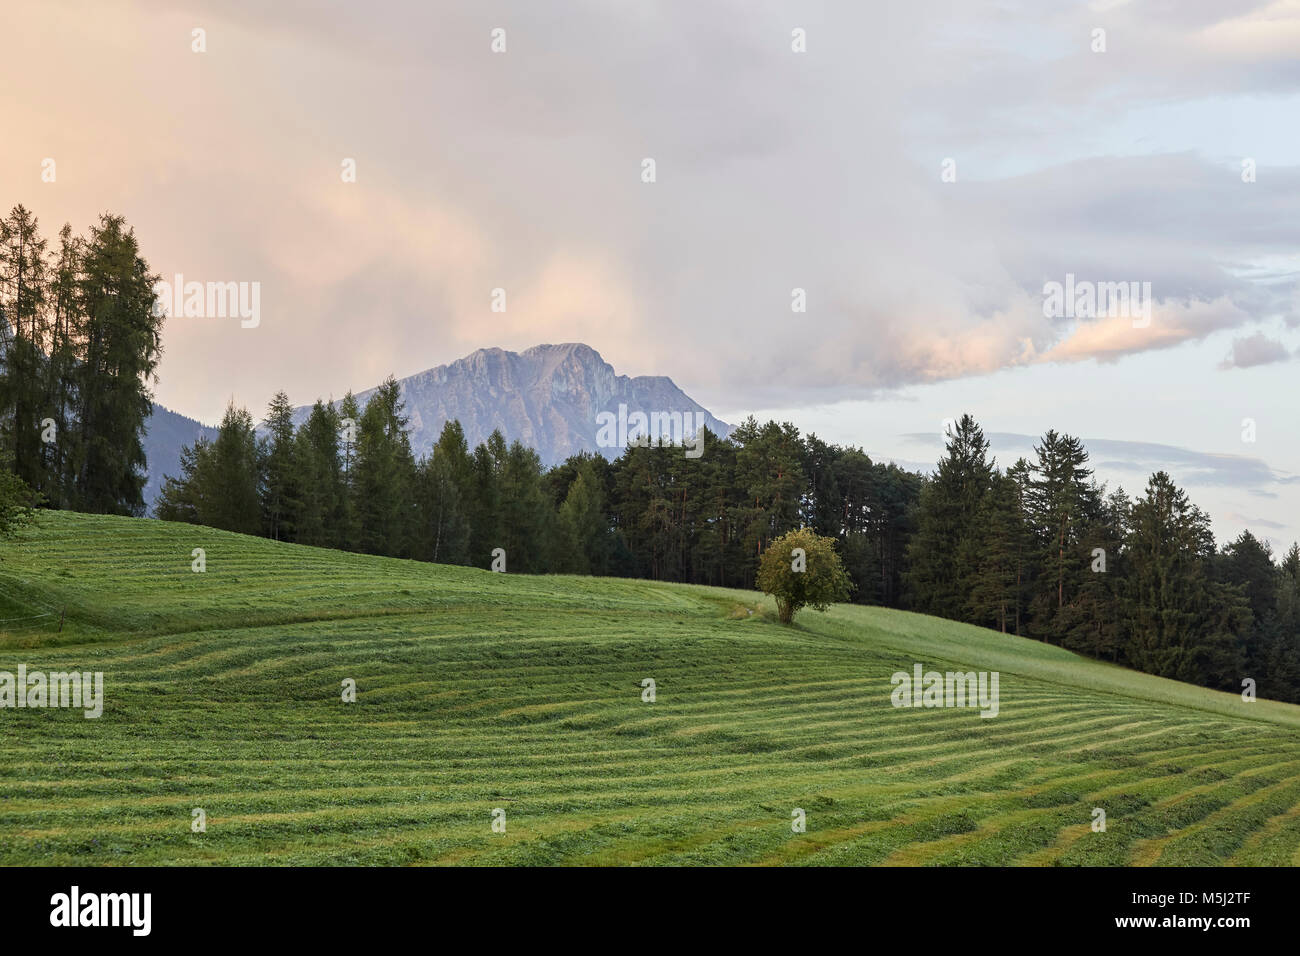 Austria, Tyrol, Mieming Plateau, mowed meadow after sunset Stock Photo